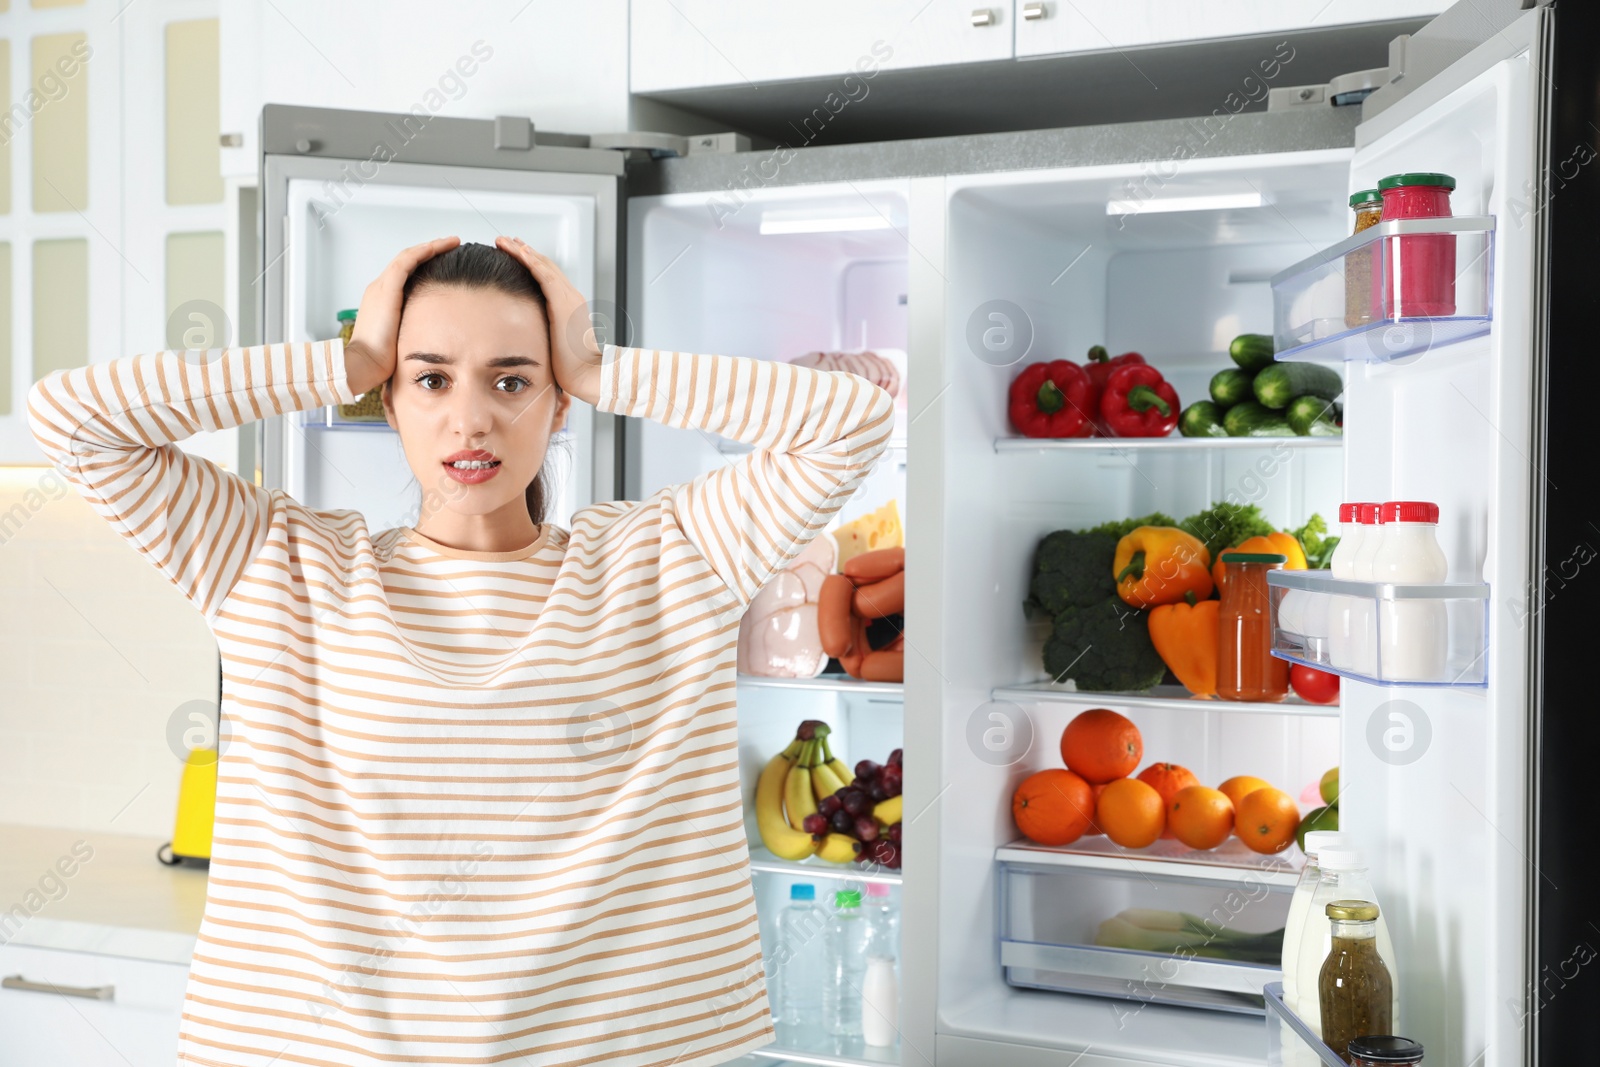 Photo of Emotional young woman near open refrigerator in kitchen